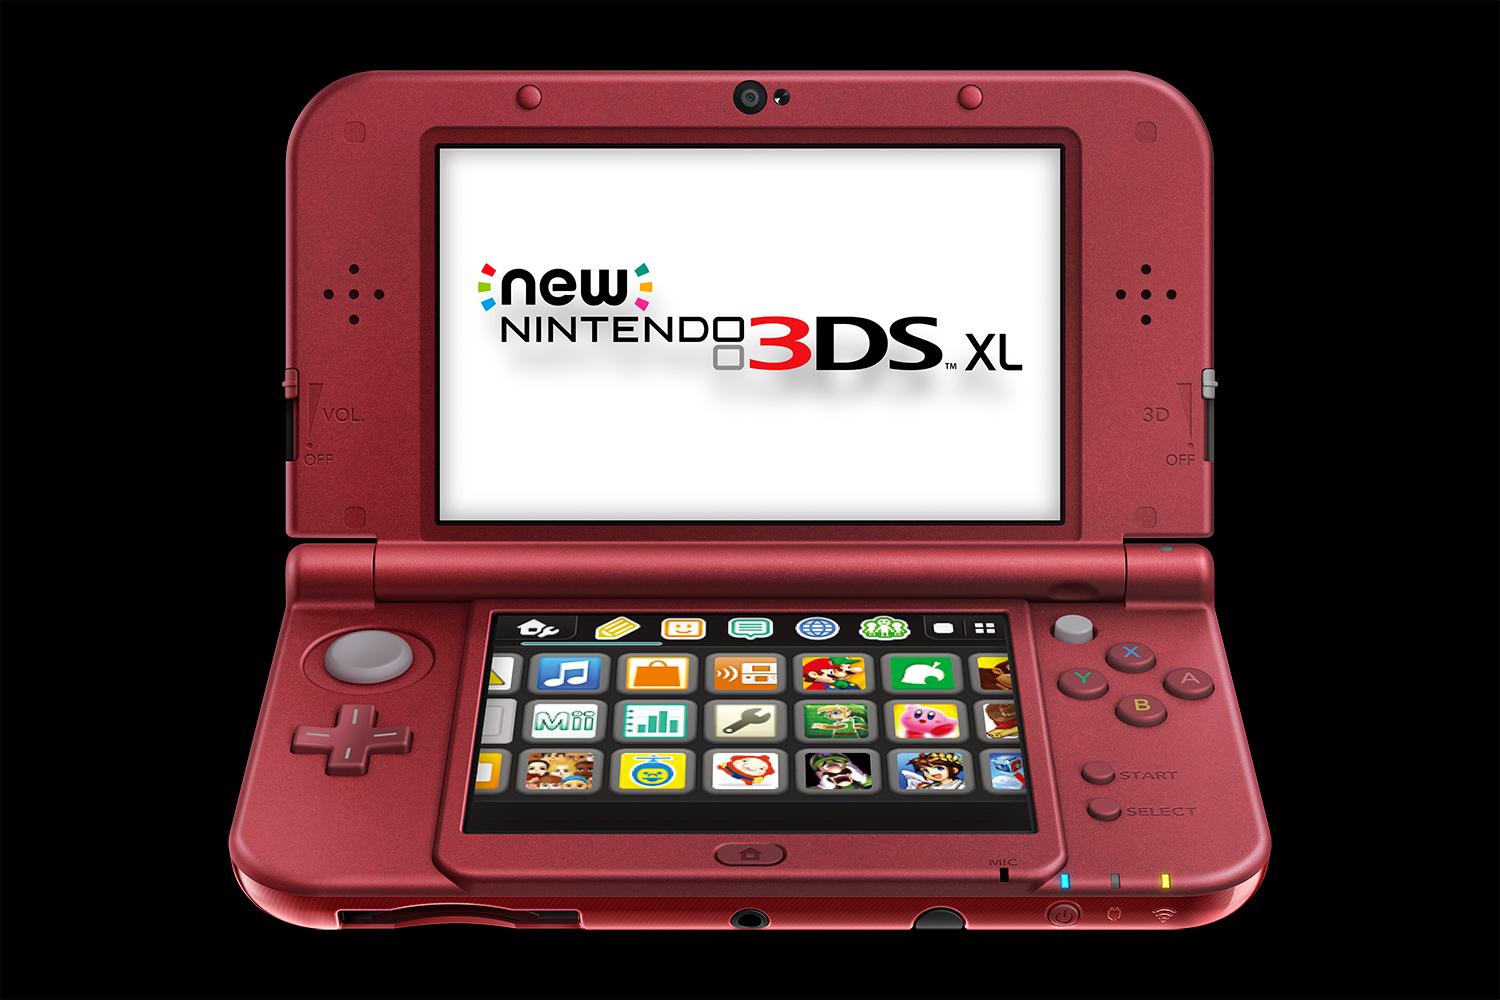 New Nintendo 3DS XL review | Handheld gaming console